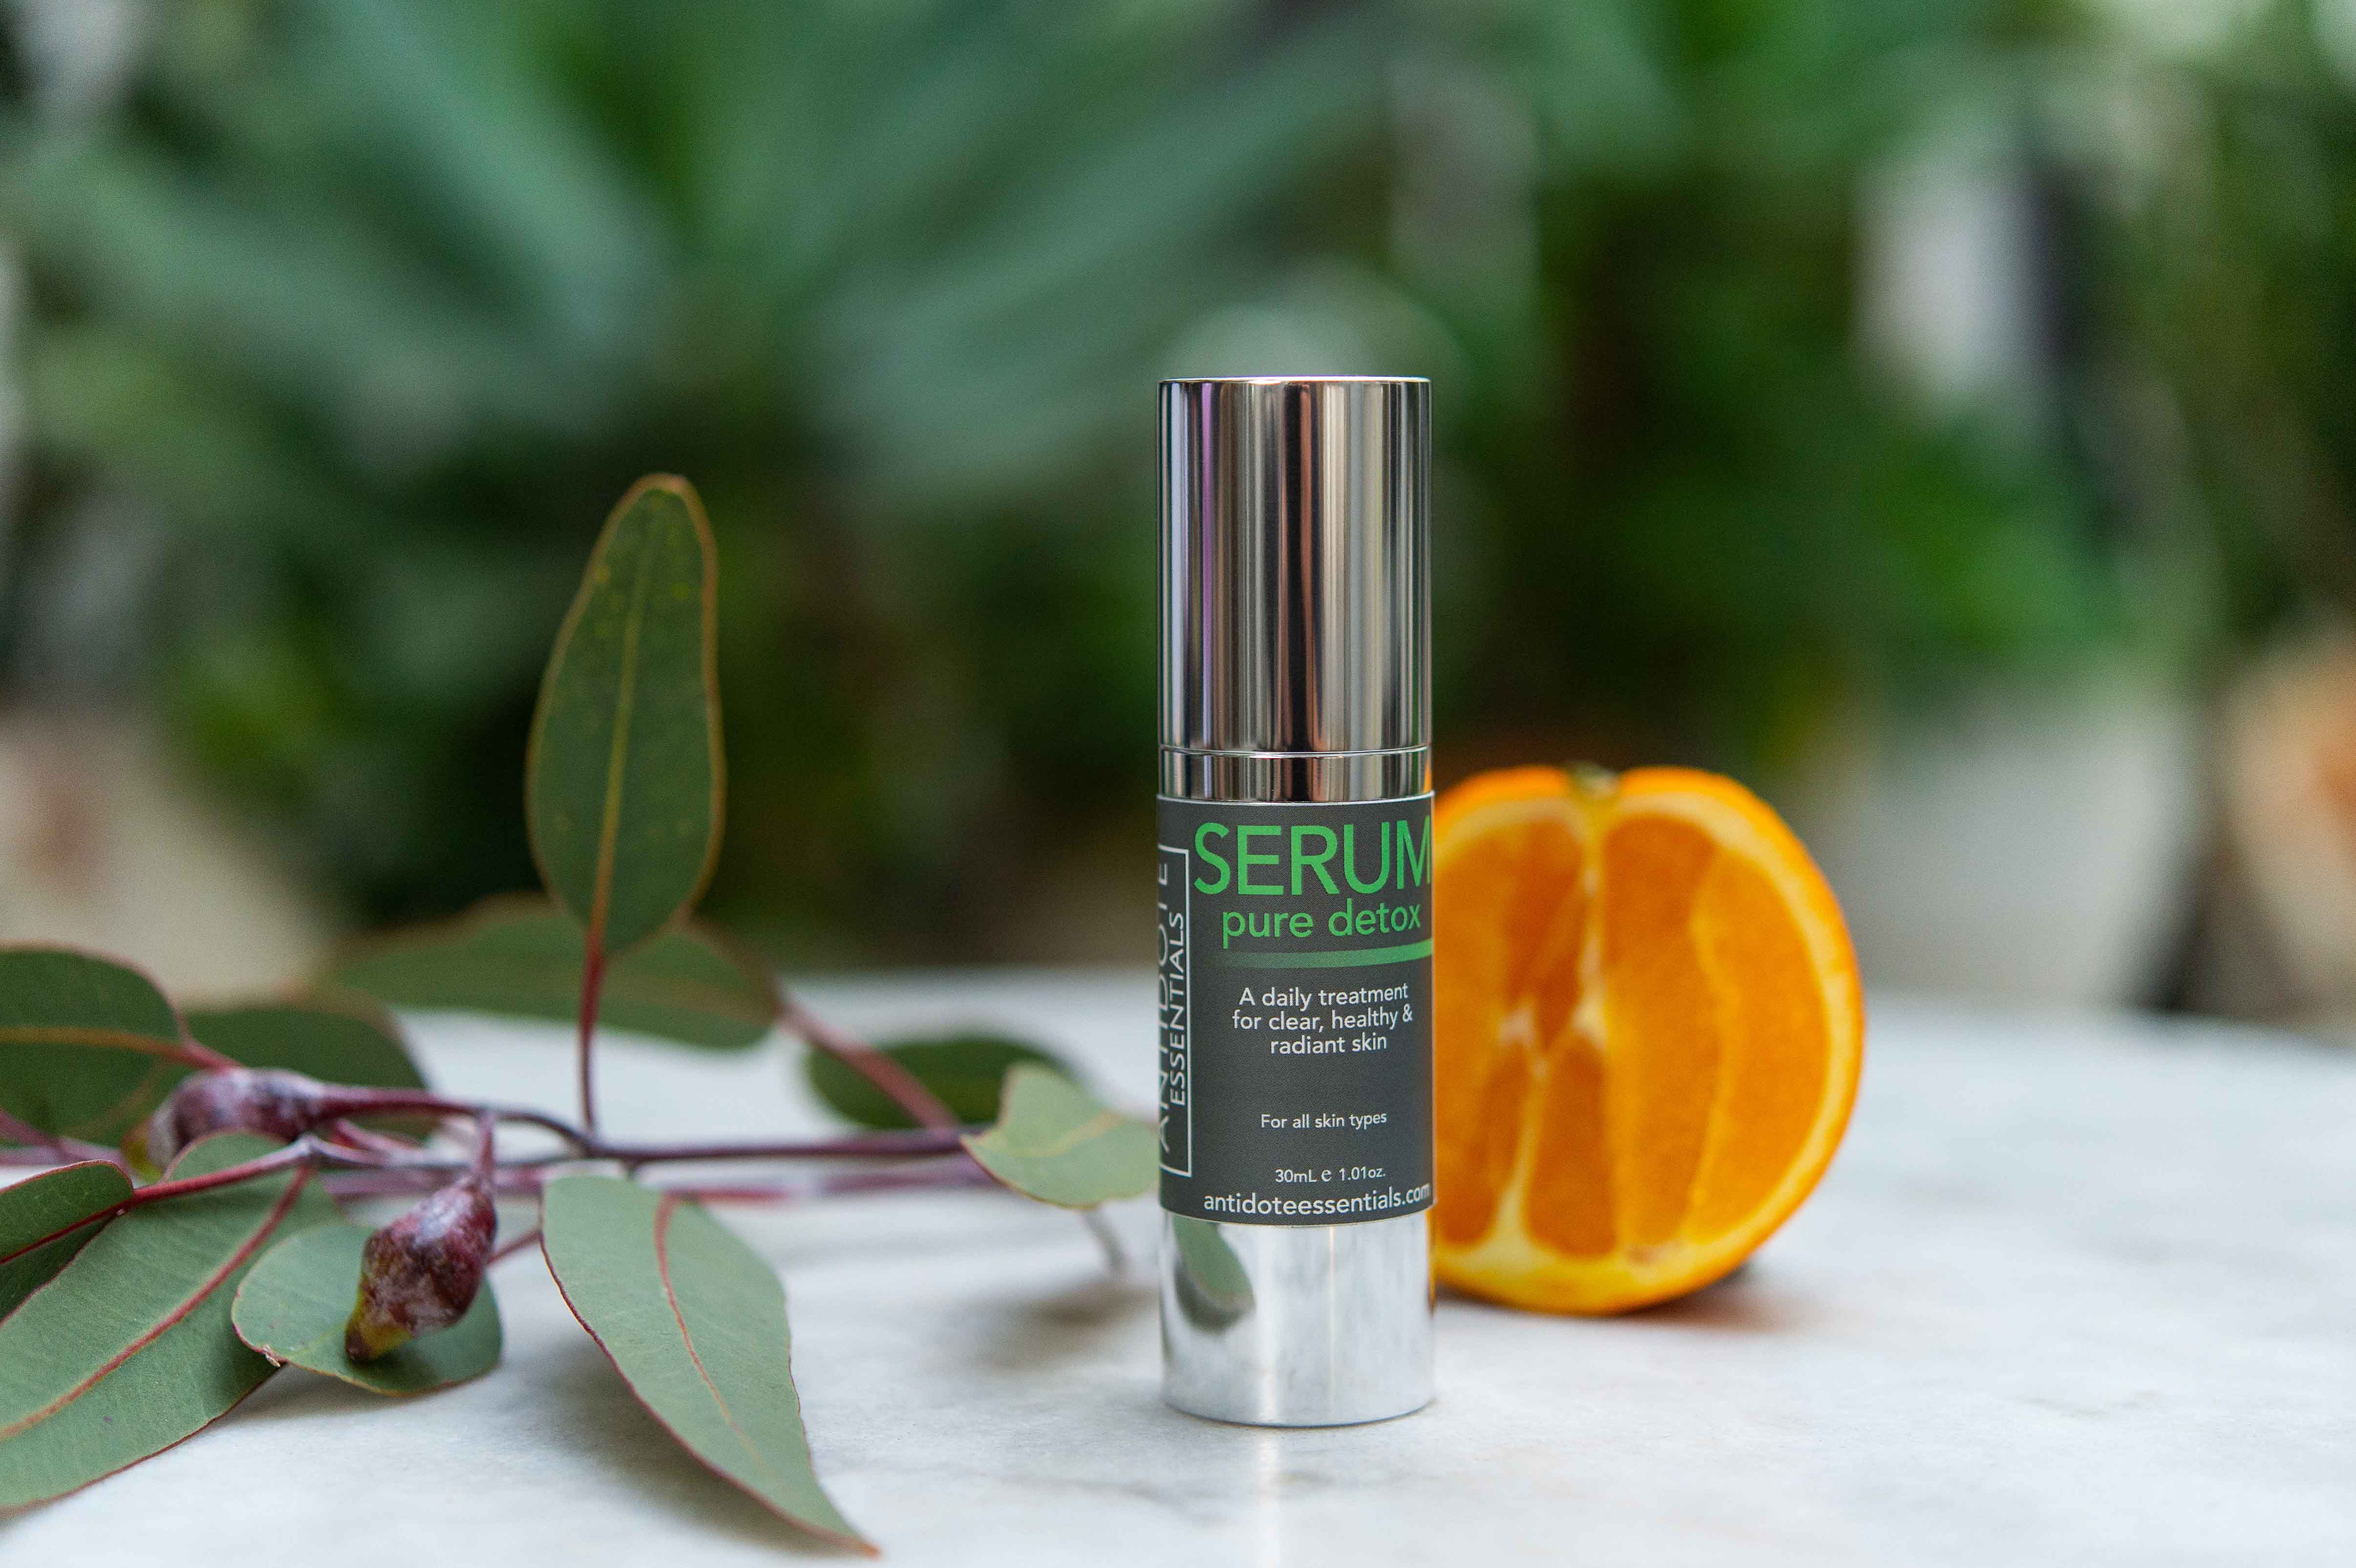 A little SERUM Pure Detox in your day can make all the difference